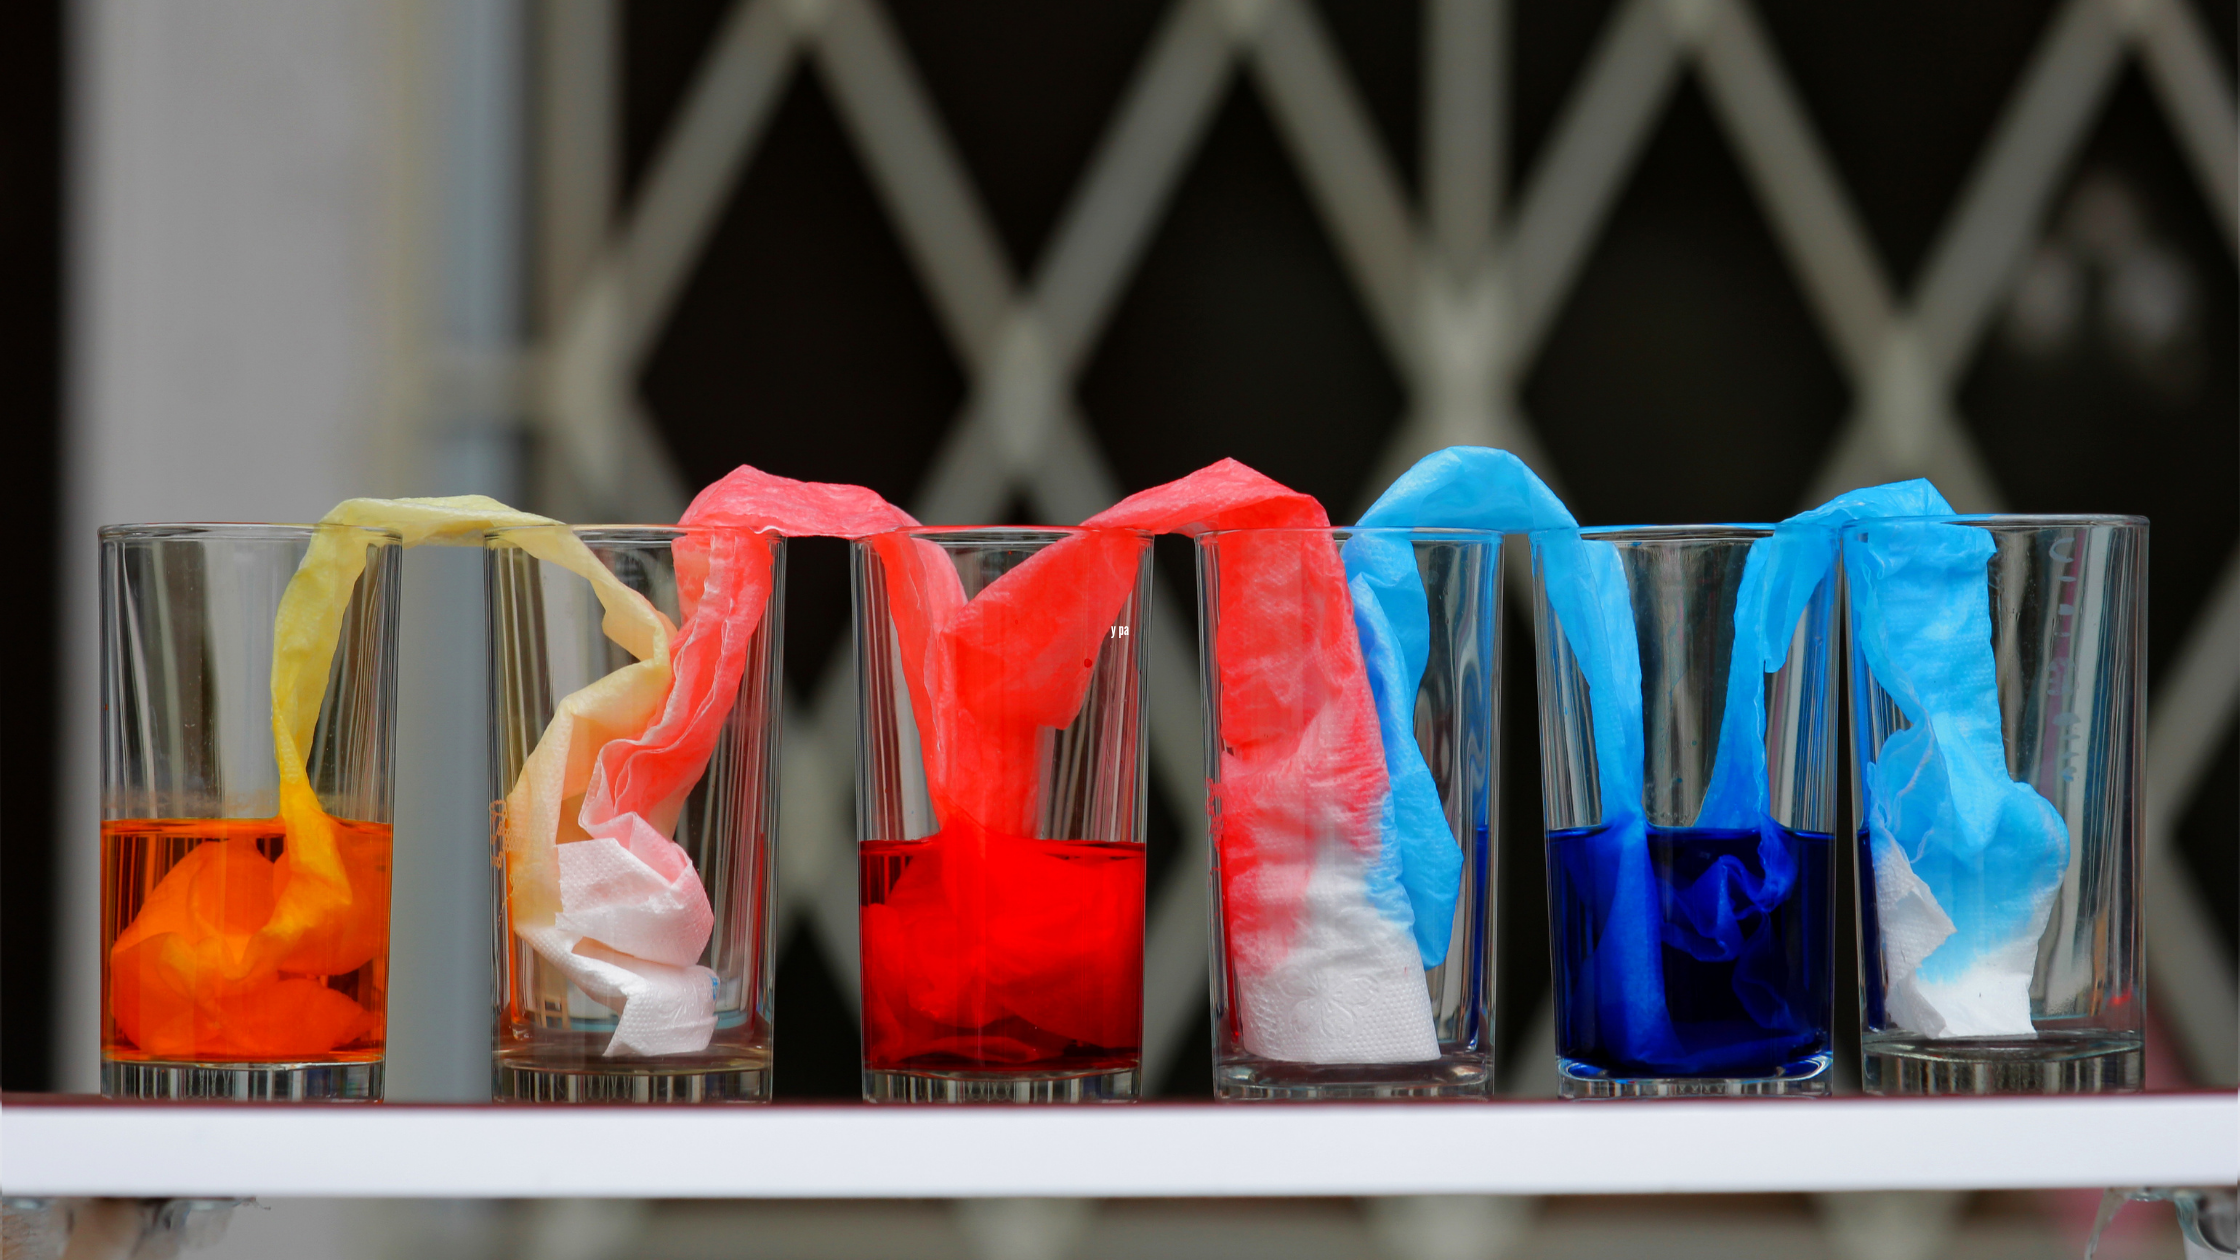 5 Fun & Cool Science Activities with Dye to Do With the Kids 9